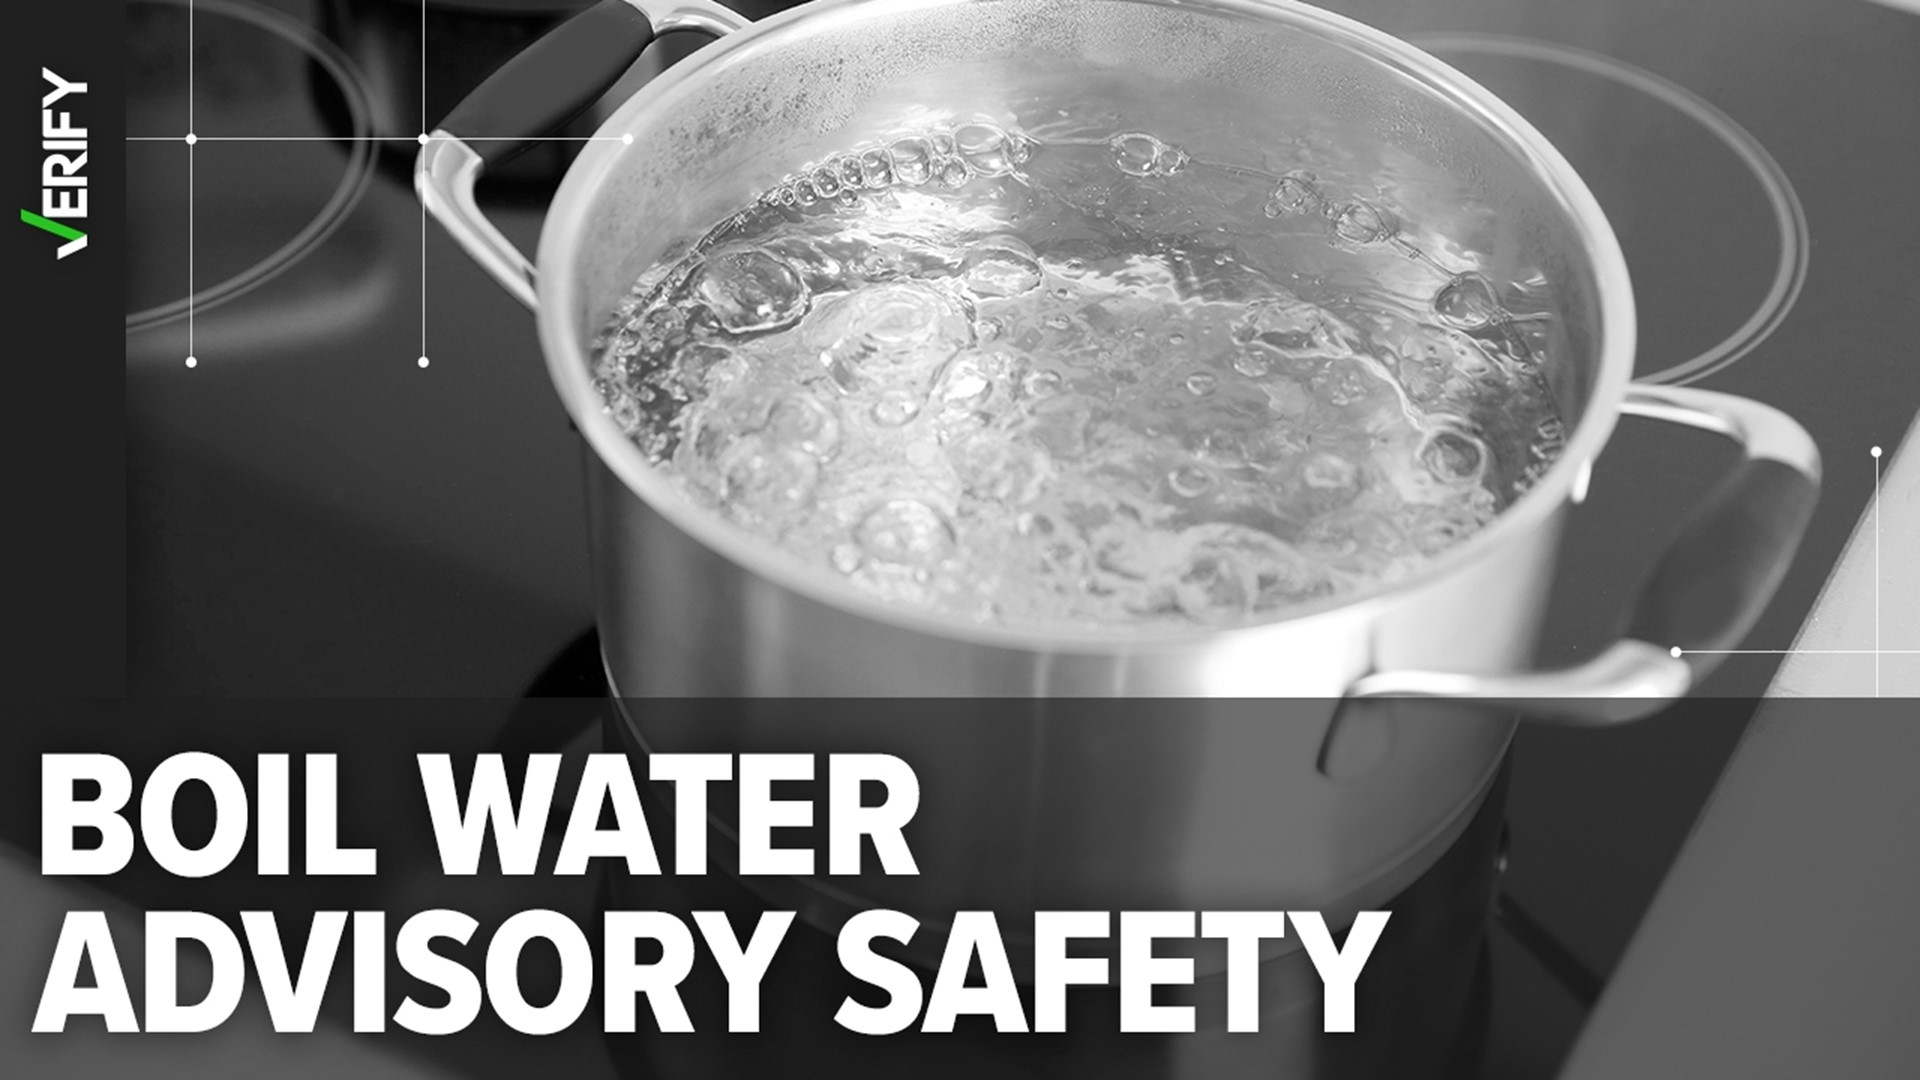 We VERIFY whether you can brush your teeth, wash dishes or shower during a boil water advisory, and if it’s safe to drink filtered water that isn’t boiled.